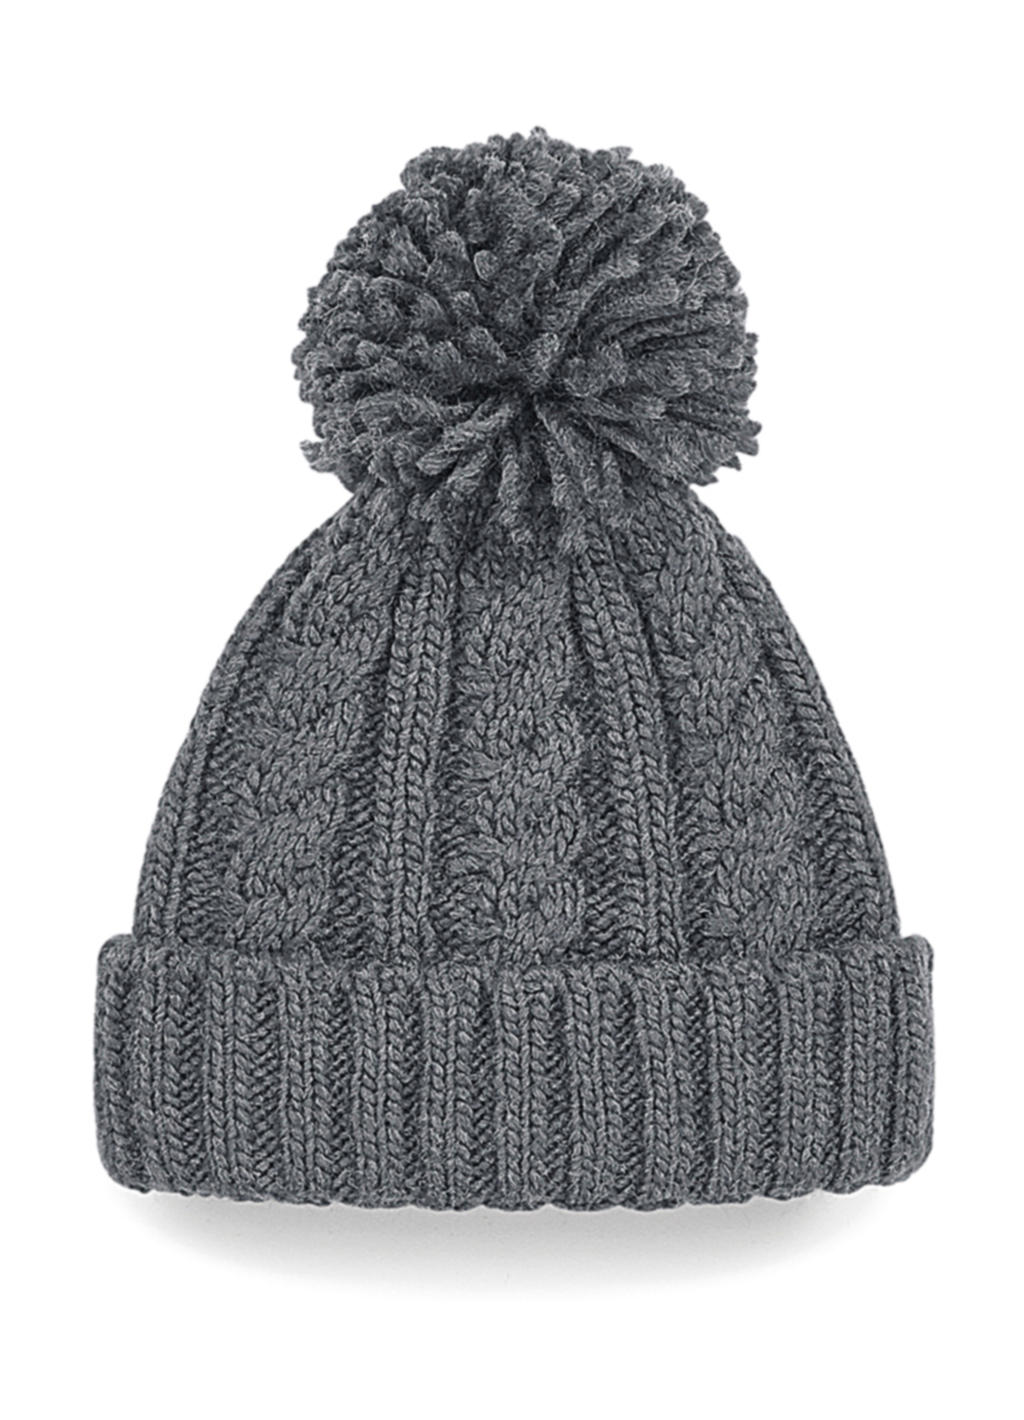  Cable Knit Melange Beanie in Farbe Light Grey